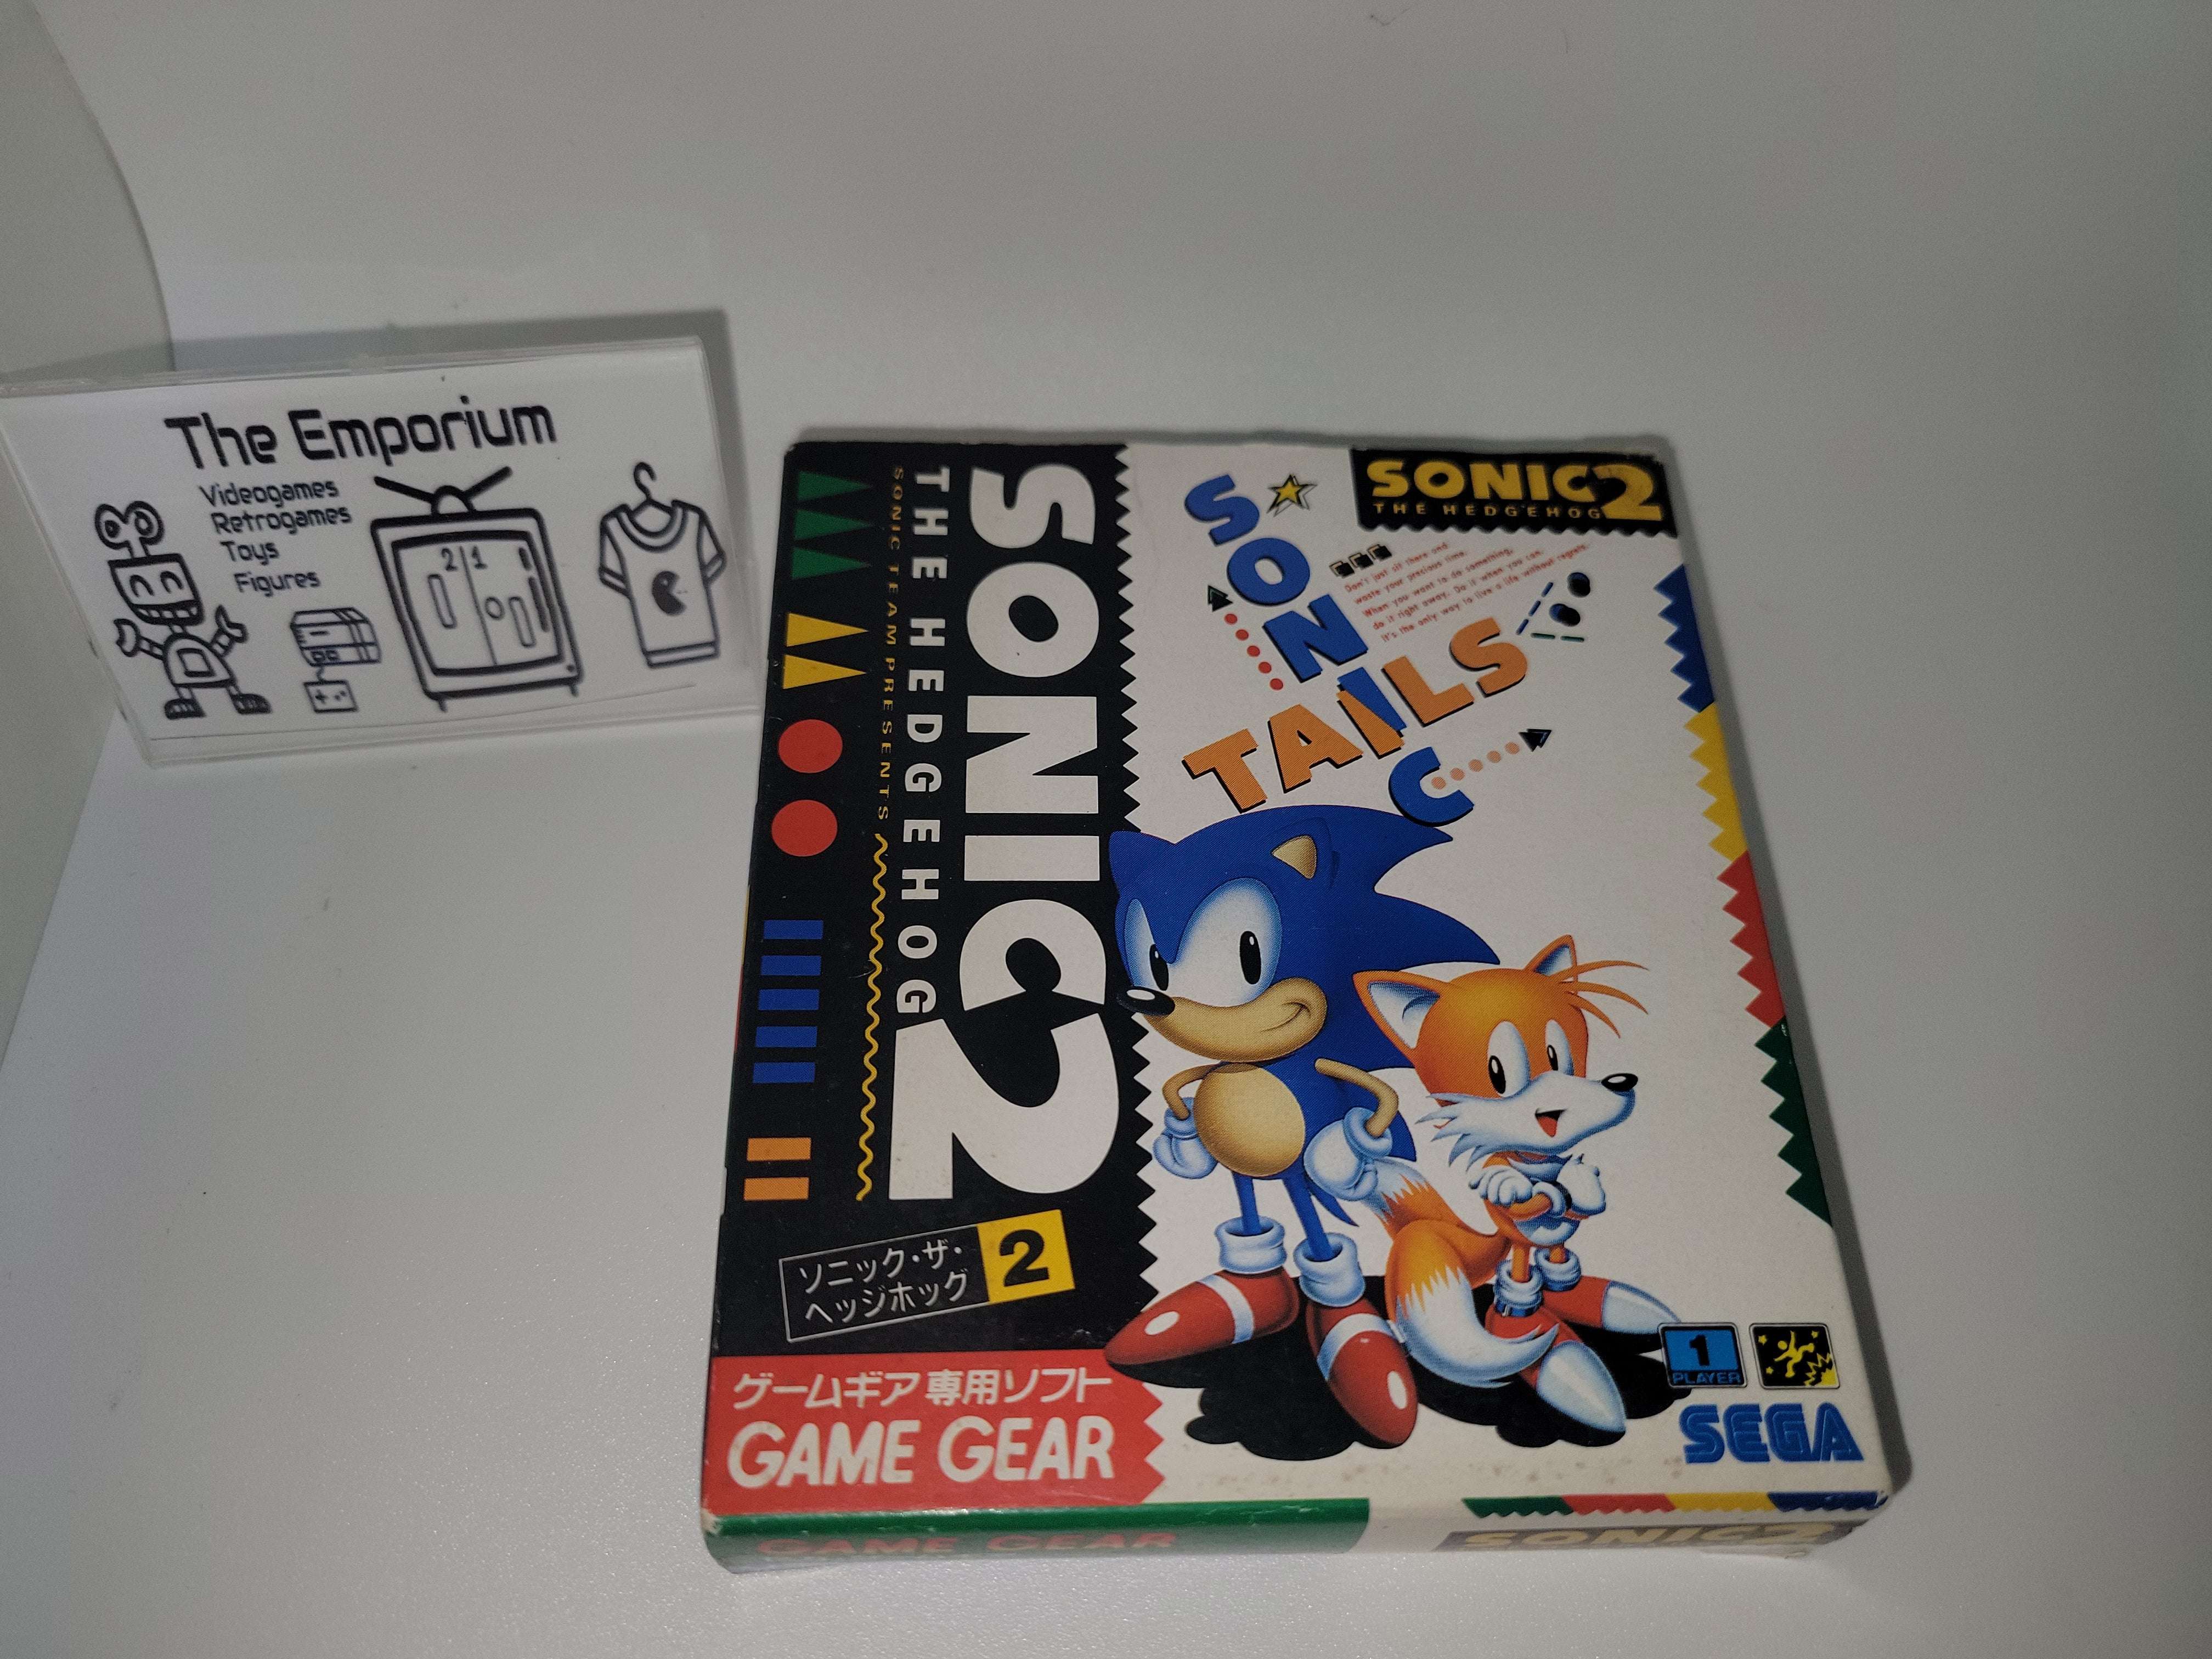 Buy Sonic the Hedgehog 2 - used good condition (Megadrive Japanese